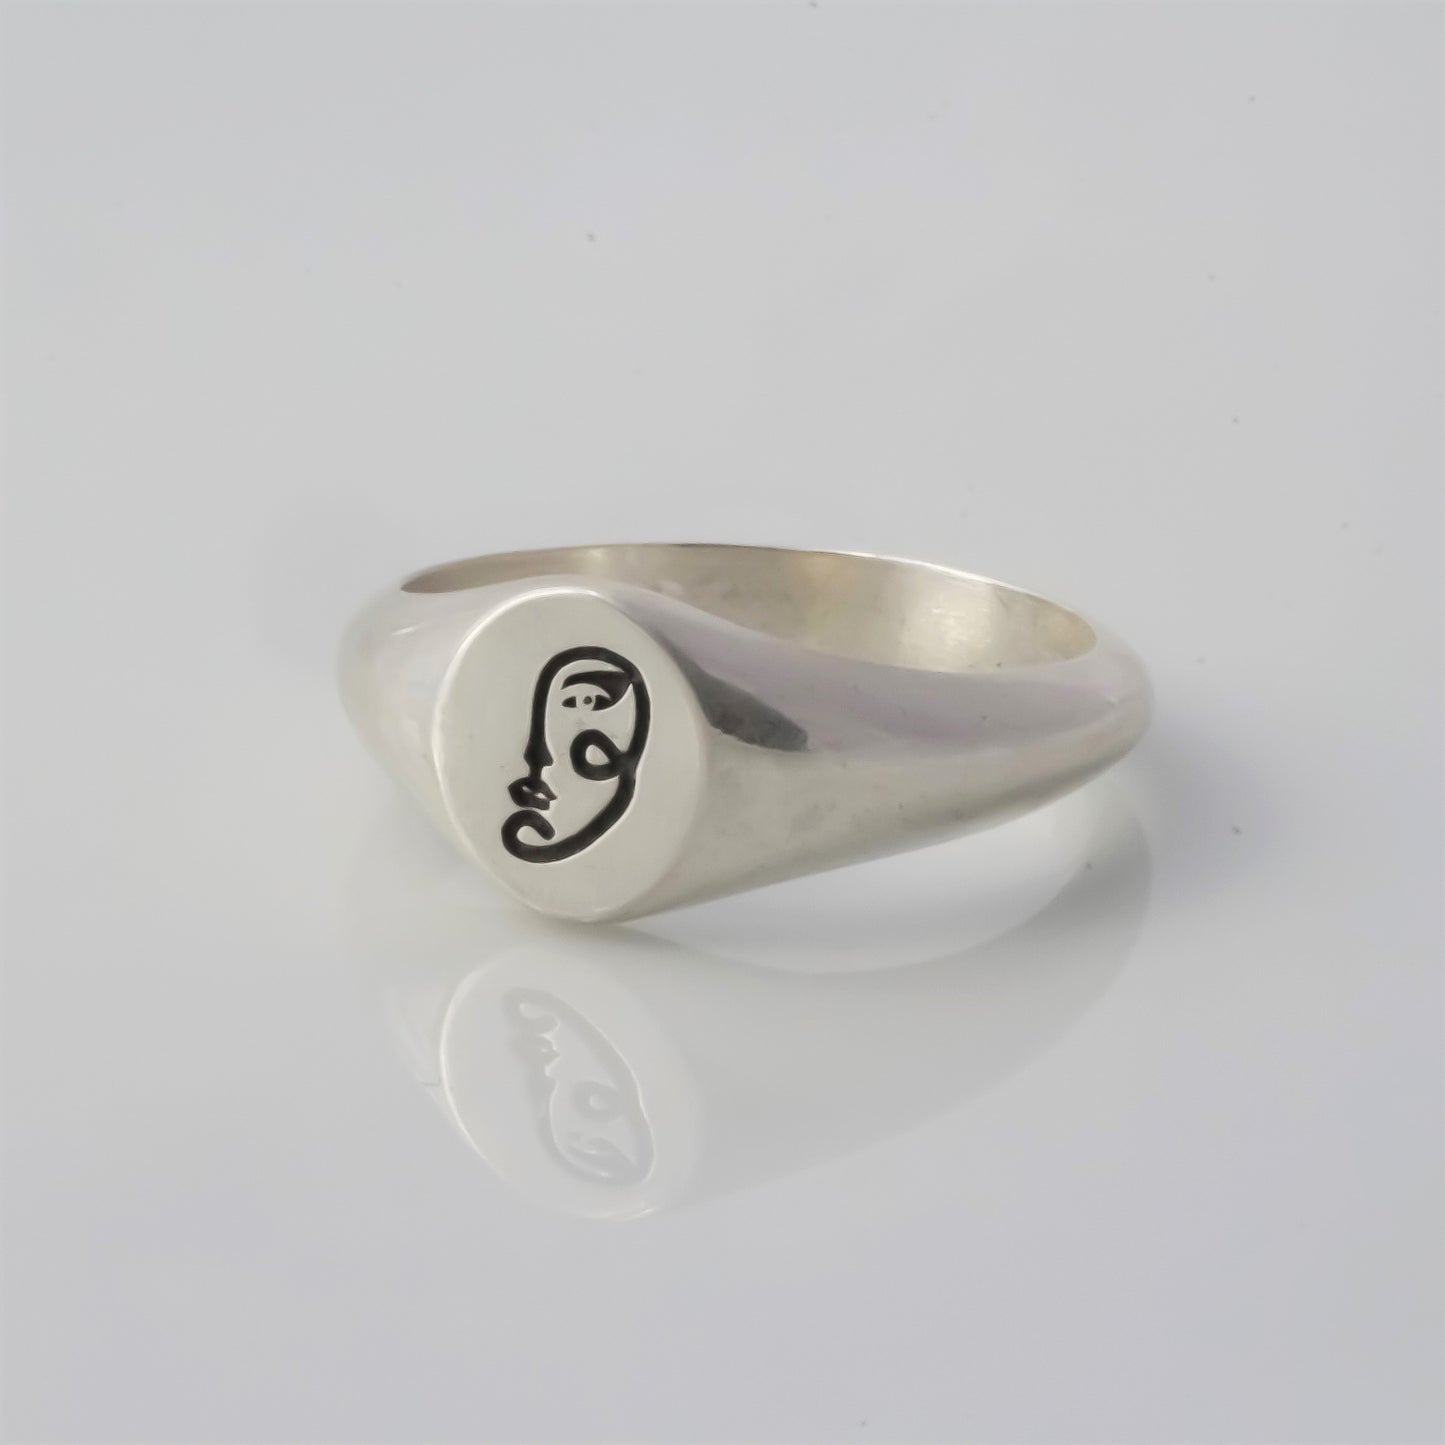 Picasso signet ring silver